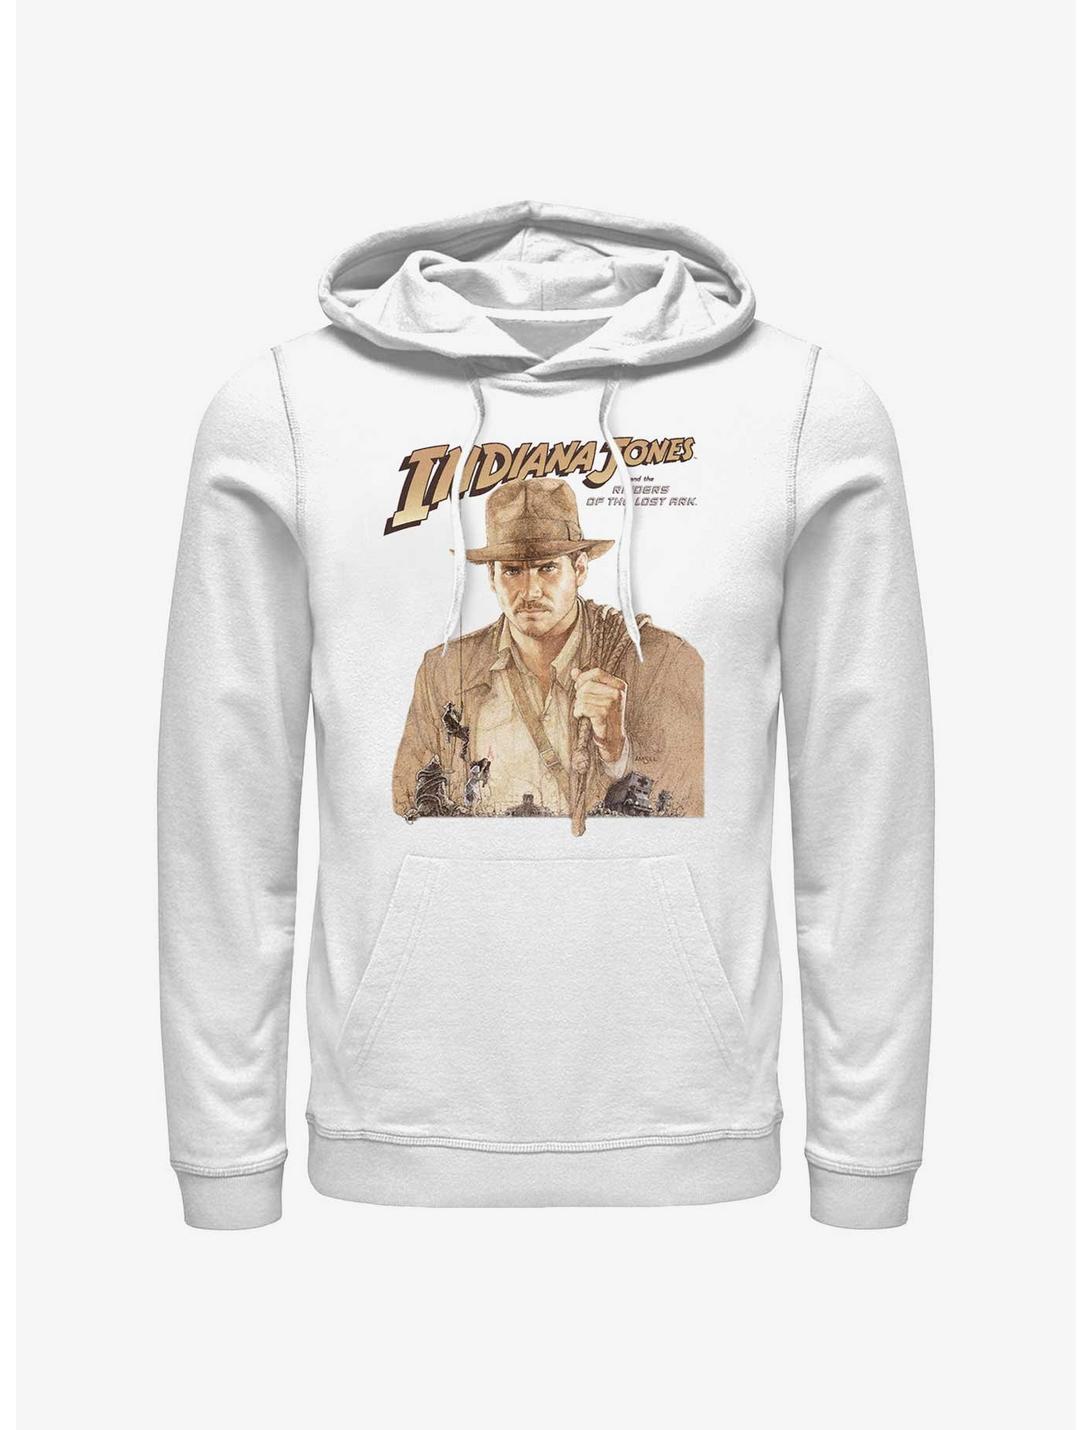 Indiana Jones and the Raiders of the Lost Ark Hoodie, WHITE, hi-res